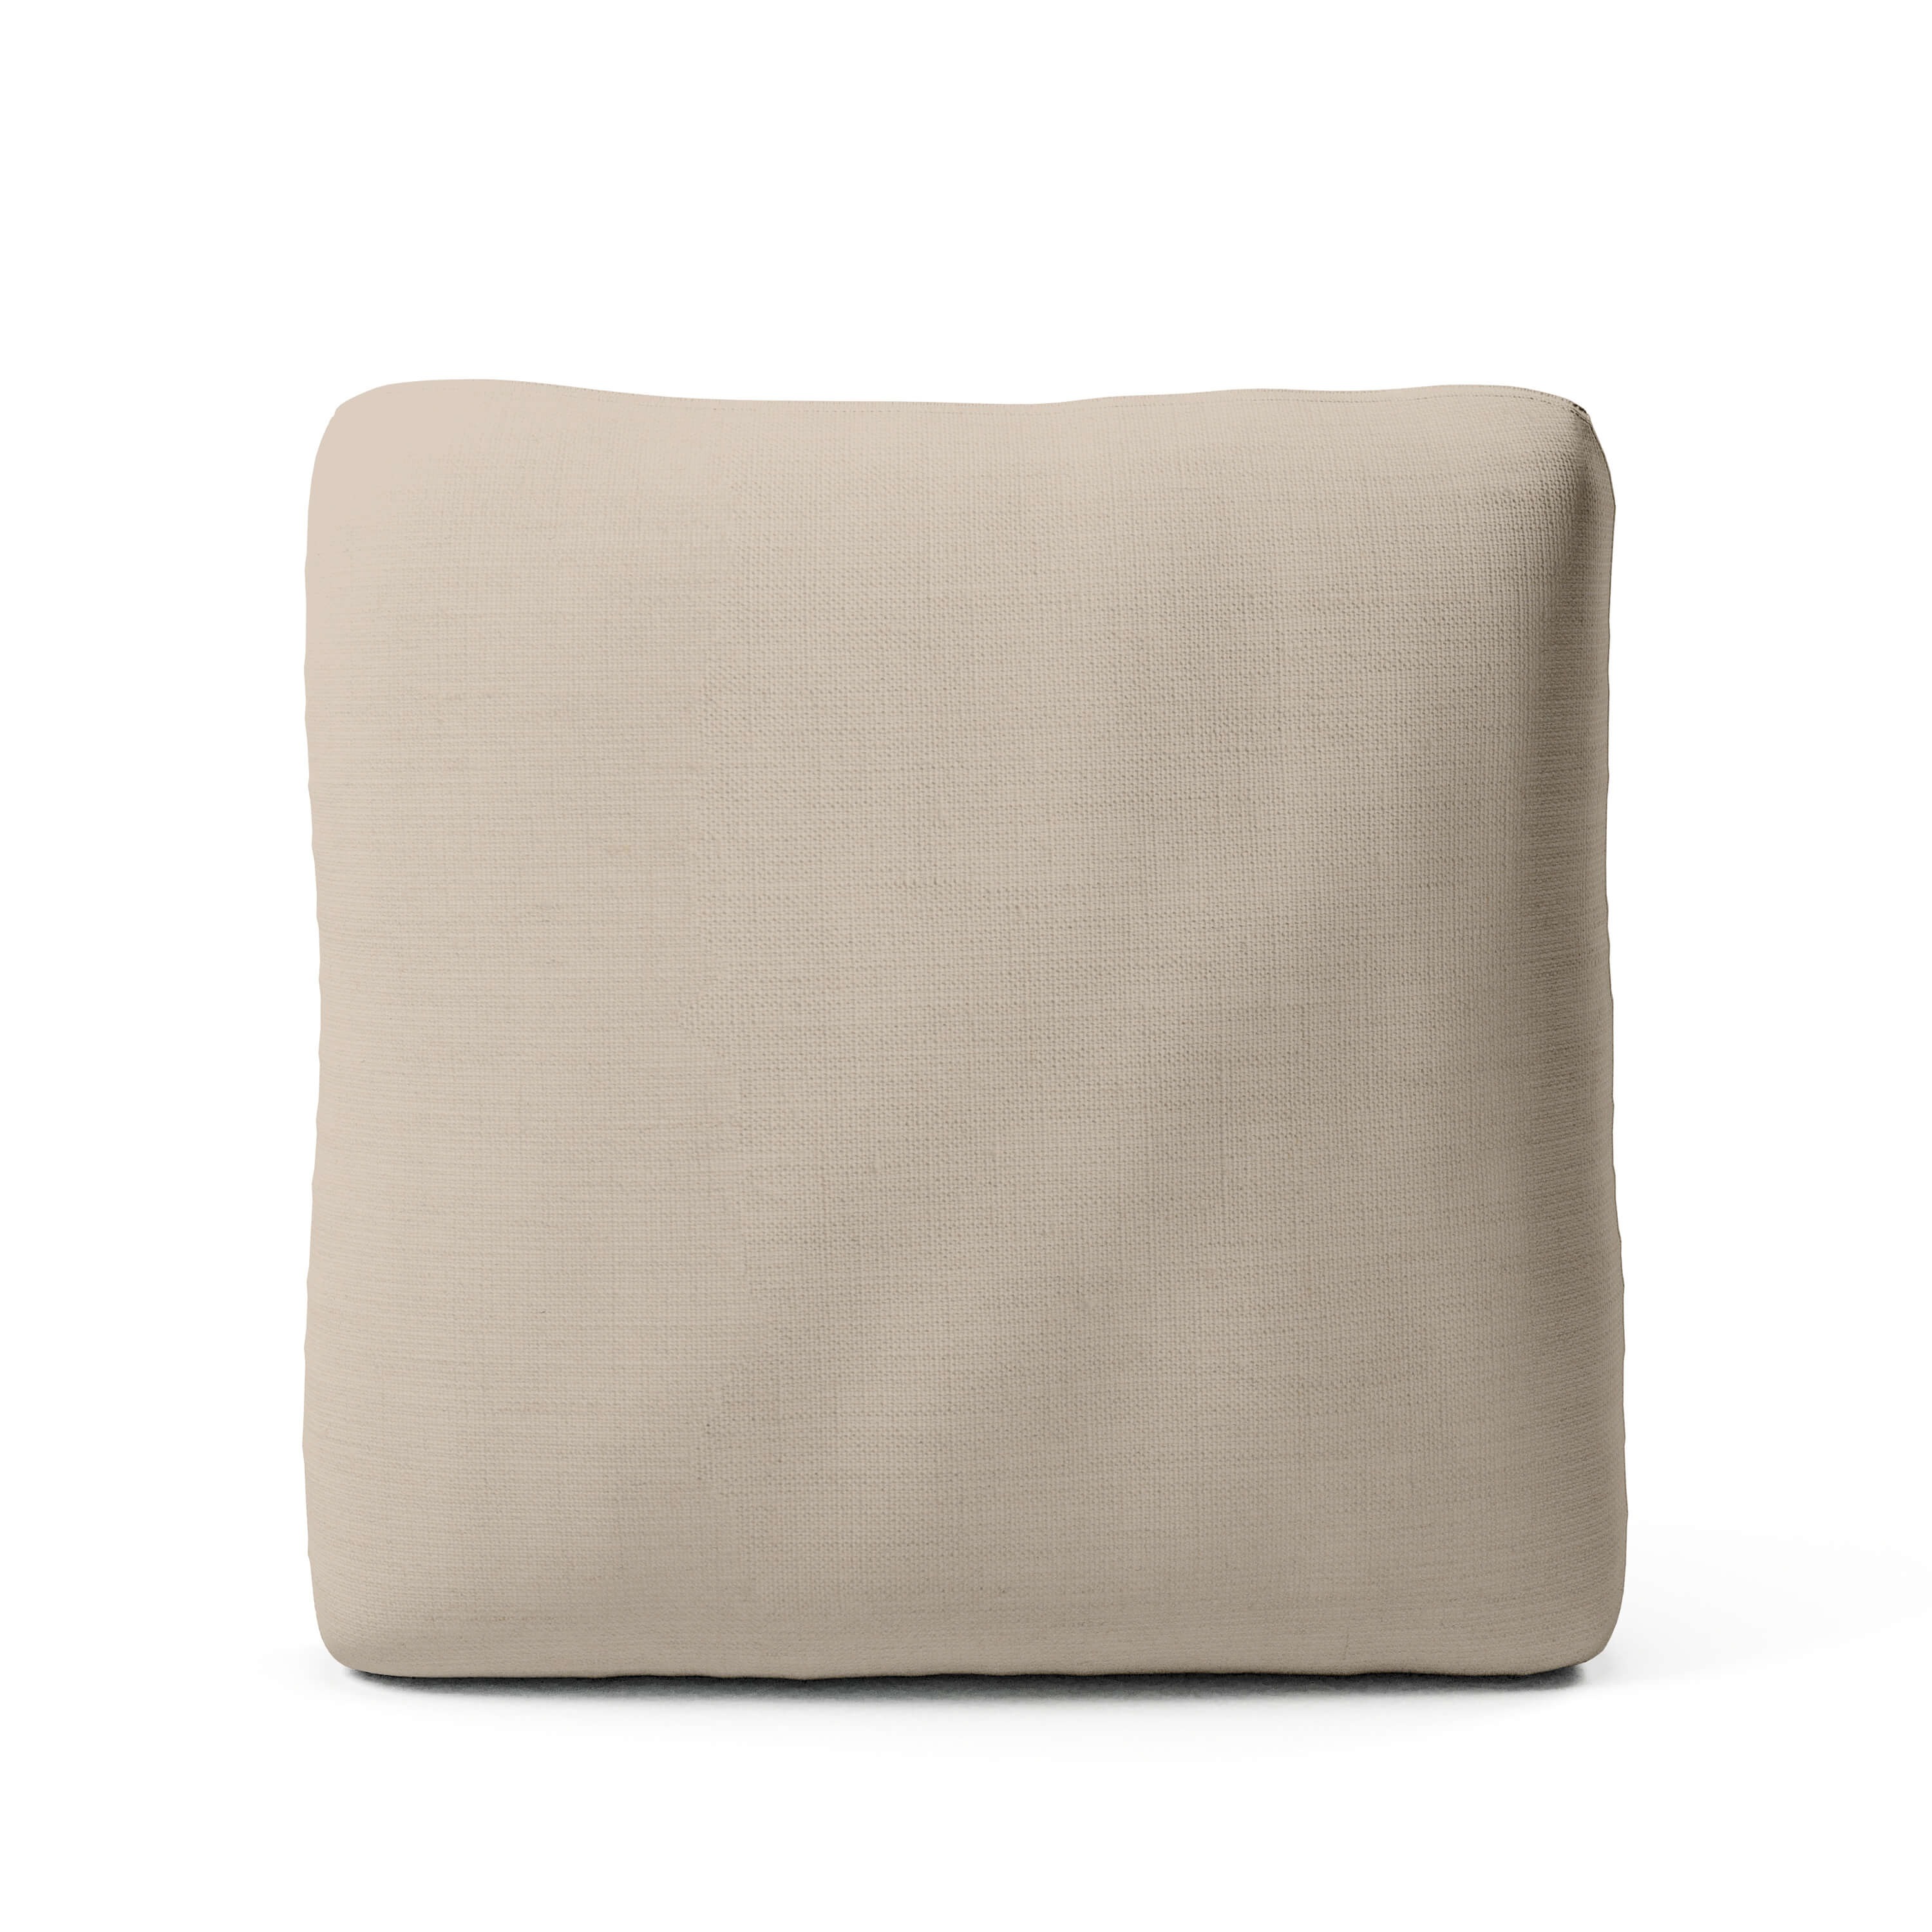 Comfy Sofa - Seat Cushion Replacement